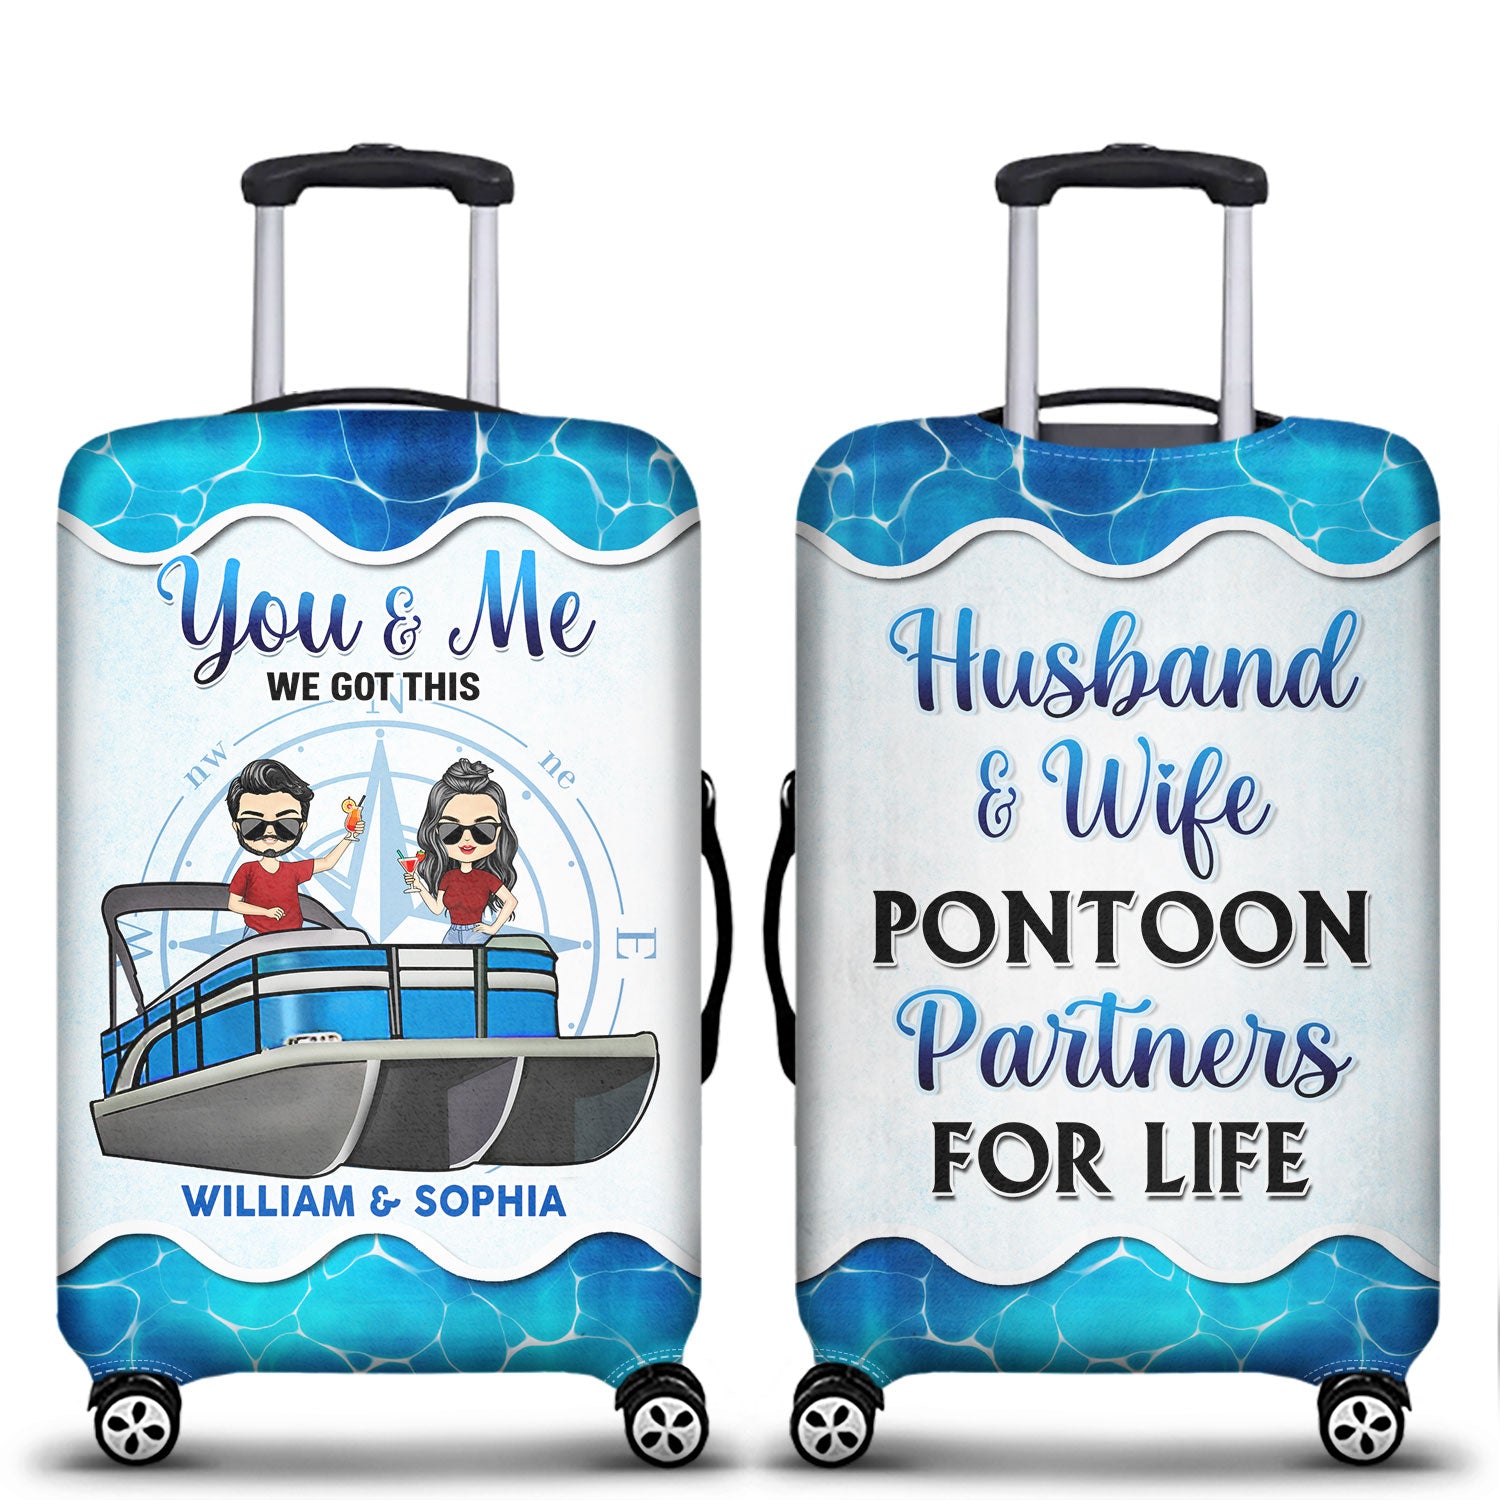 Boating Husband & Wife Pontoon Partners For Life - Traveling, Cruising Gift For Couples, Pontooning Lovers, Lake Lovers, Travelers - Personalized Custom Luggage Cover